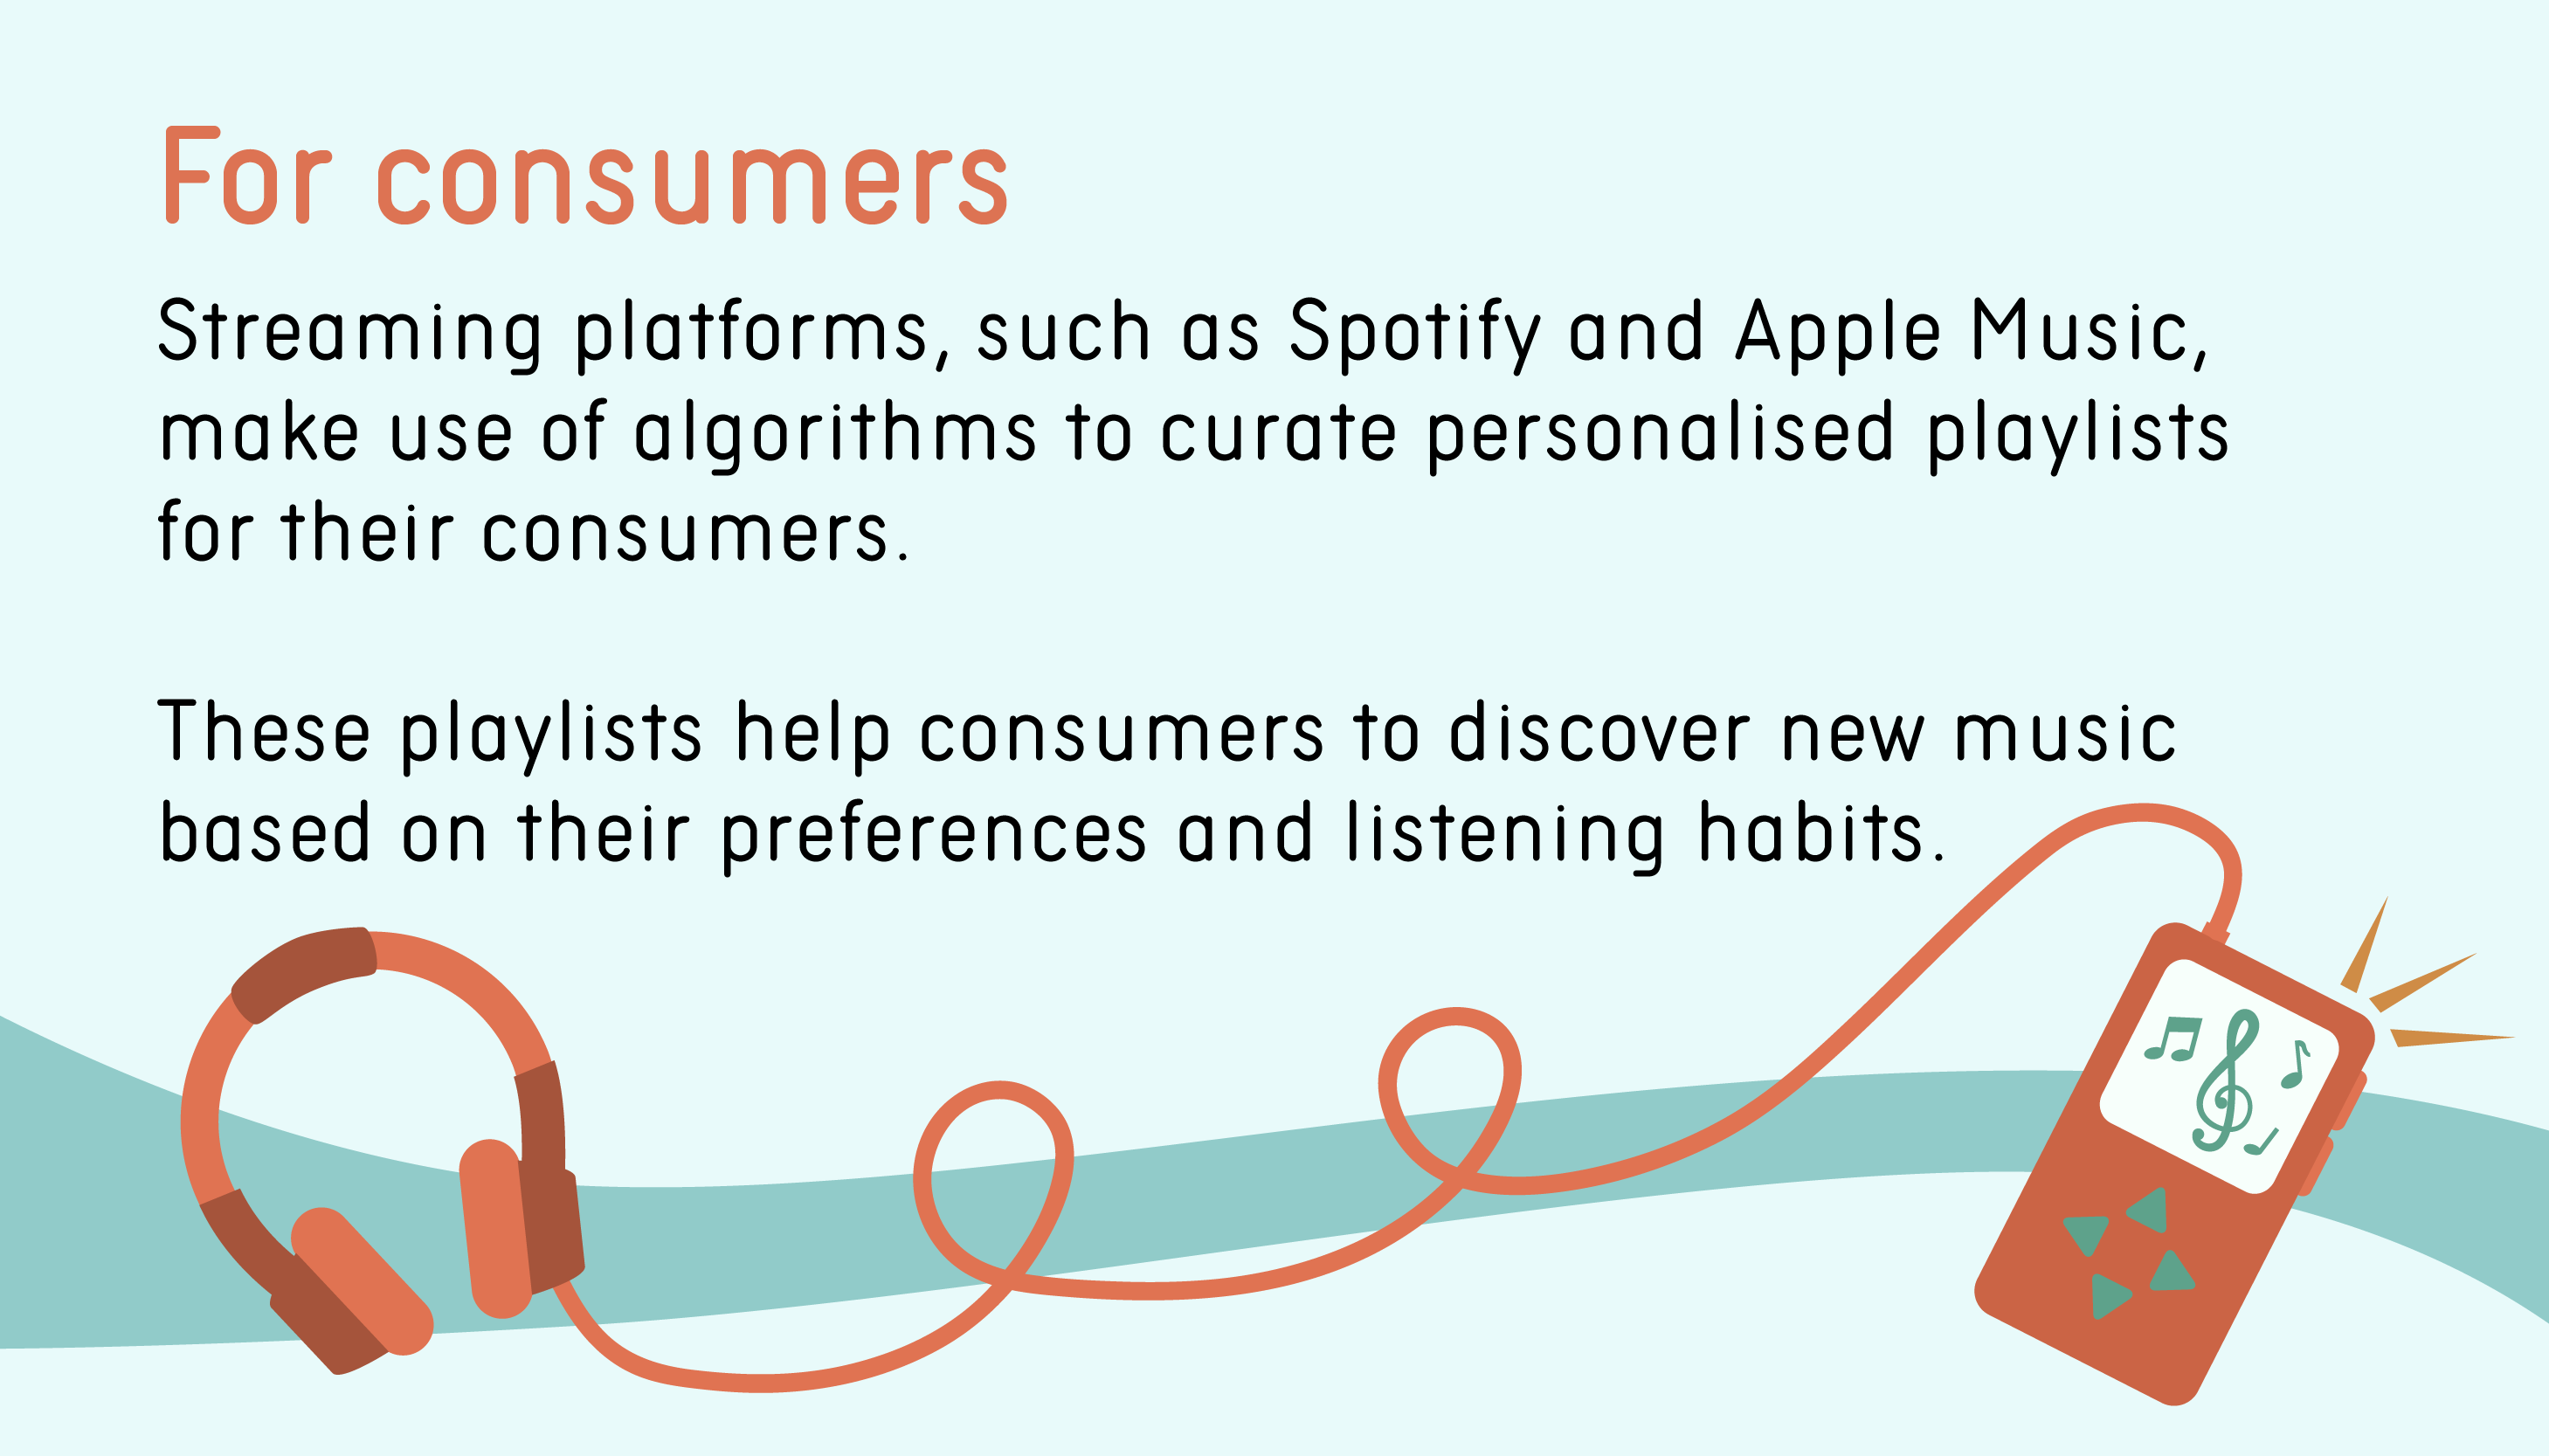 For consumers: Streaming platforms, such as Spotify and Apple Music, make use of algorithms to curate personalised playlists for their consumers. These playlists help consumers to discover new music based on their preferences and listening habits.